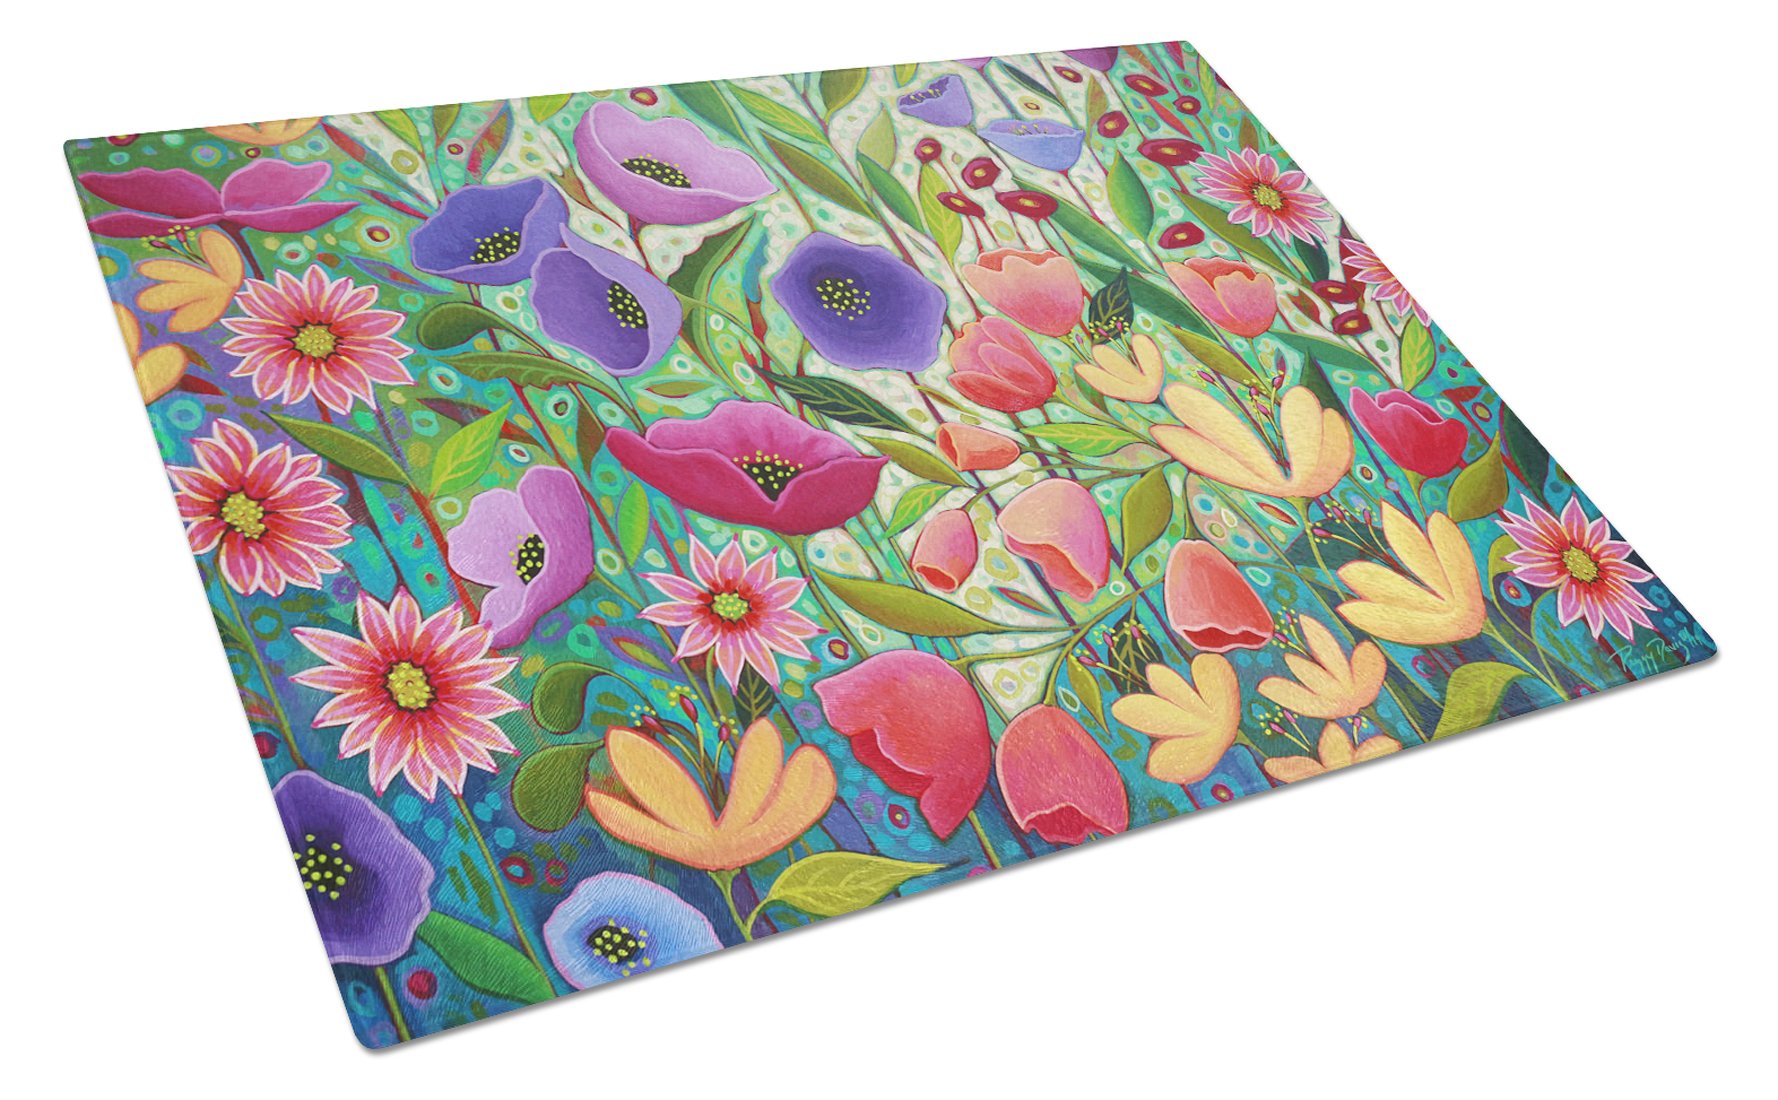 Enchanted Garden Flowers Glass Cutting Board Large PPD3013LCB by Caroline's Treasures